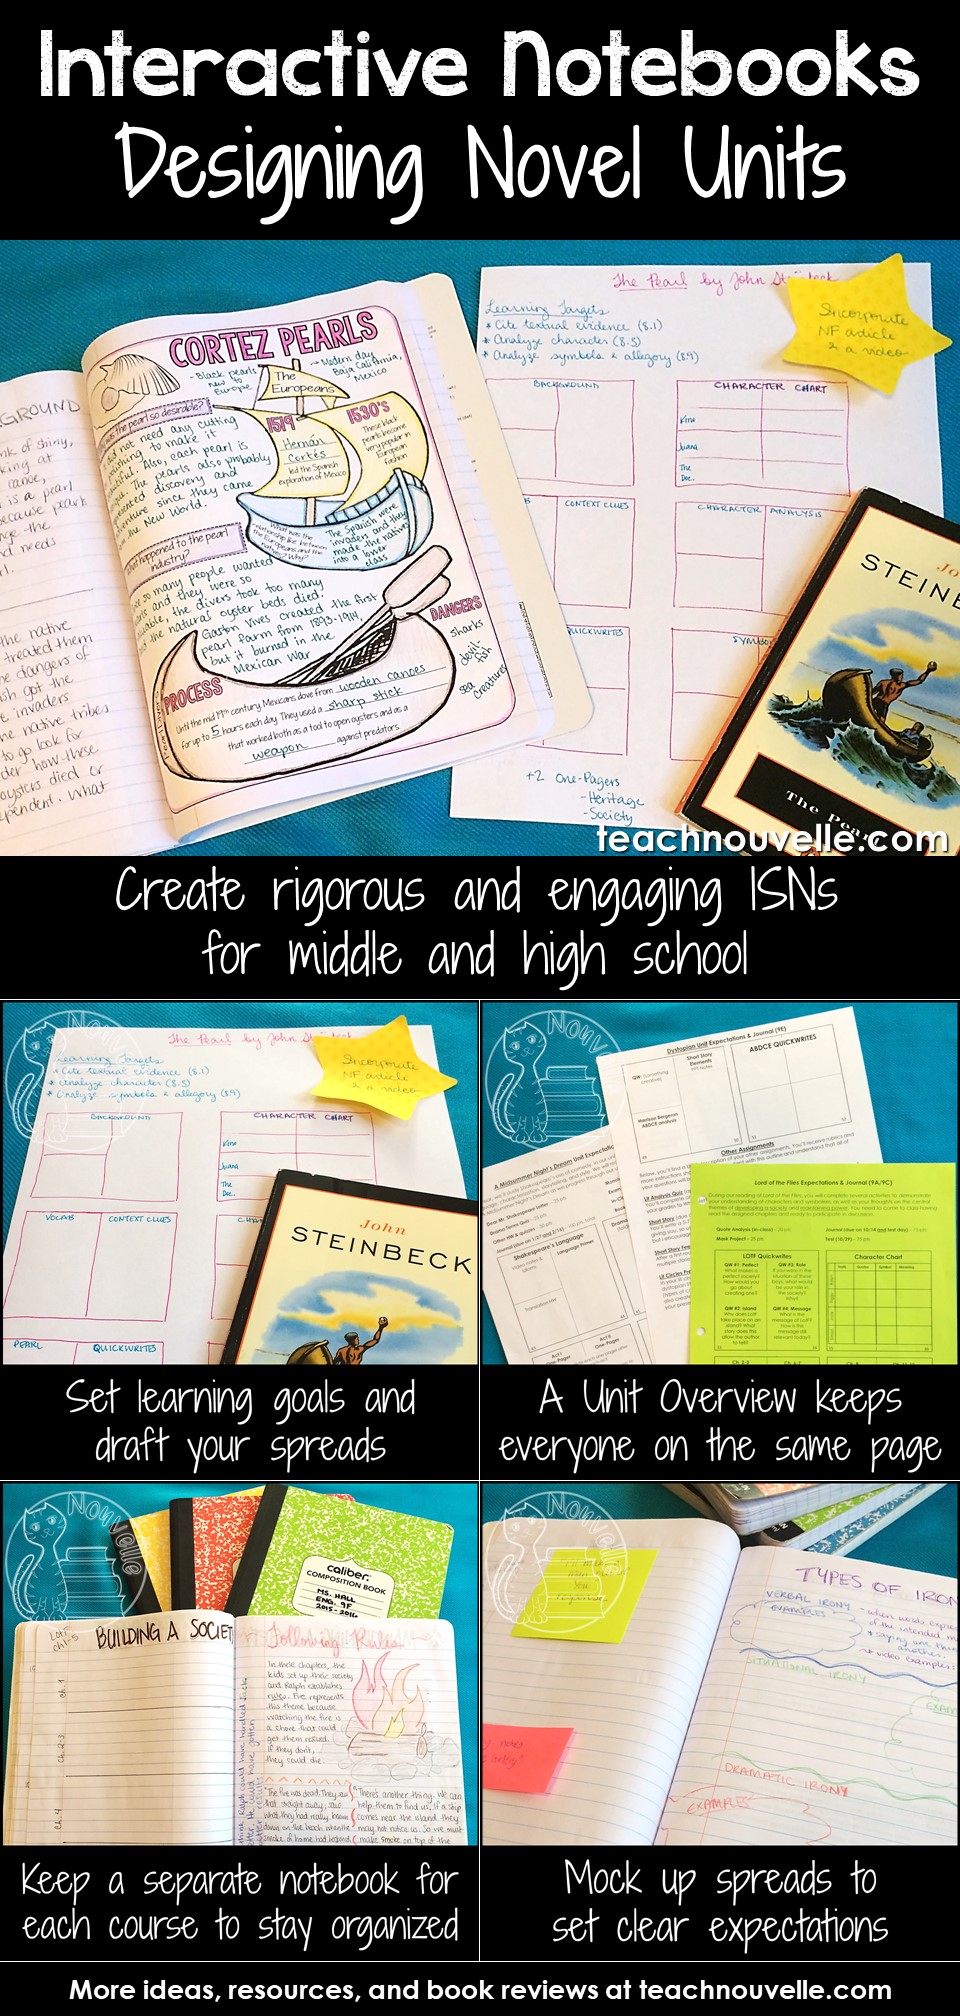 Using Interactive Notebooks to teach class novels can be rigorous and engaging, even for middle and high school. Here are some tips and tricks for setting up your novel units. Read more at teachnouvelle.com